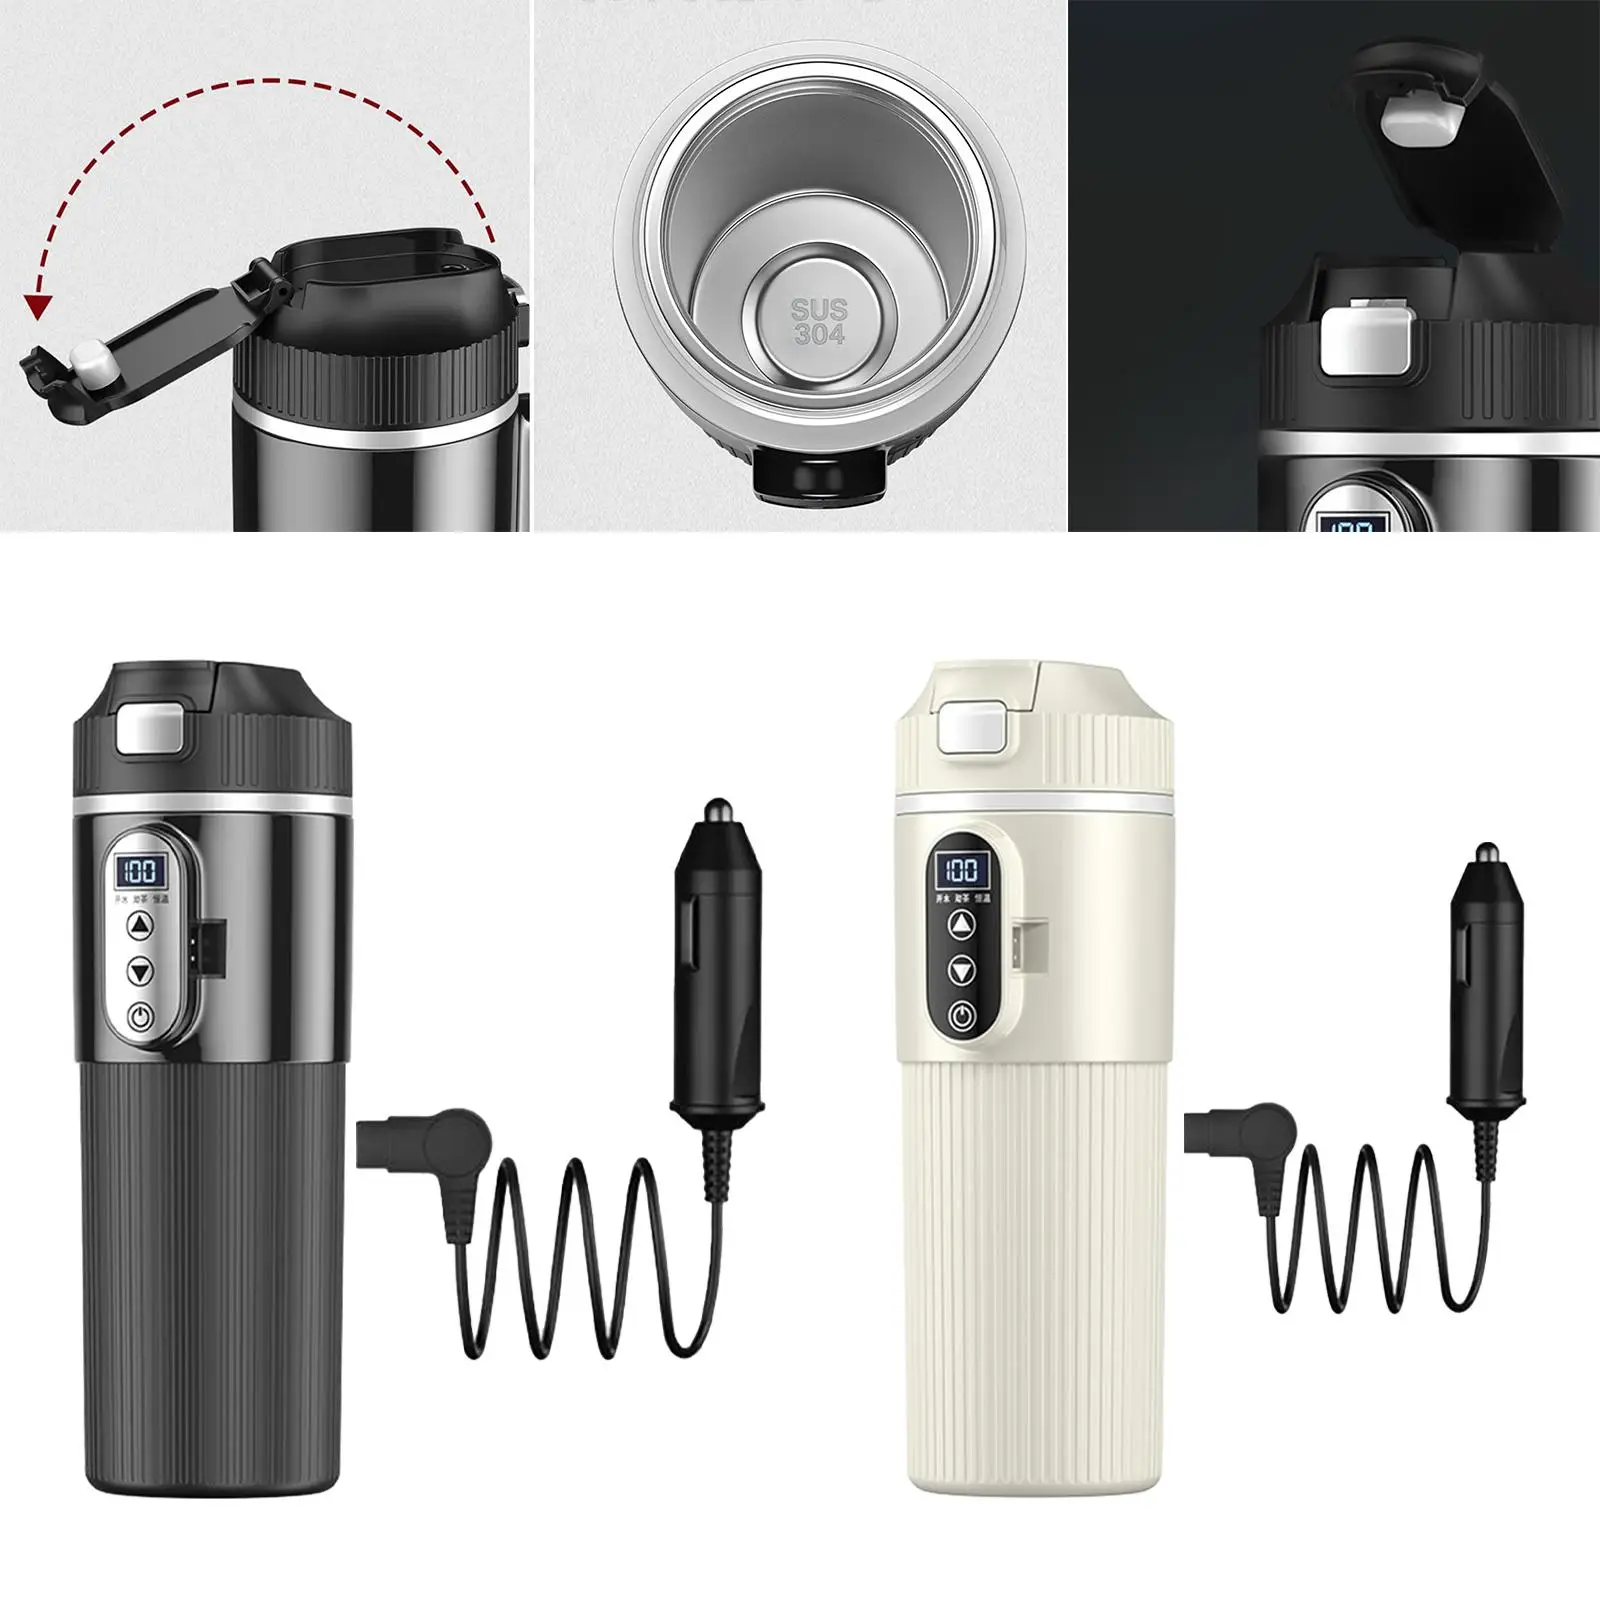 Car Heating Cup Car Electric Kettle for Tea Heating Water Camping